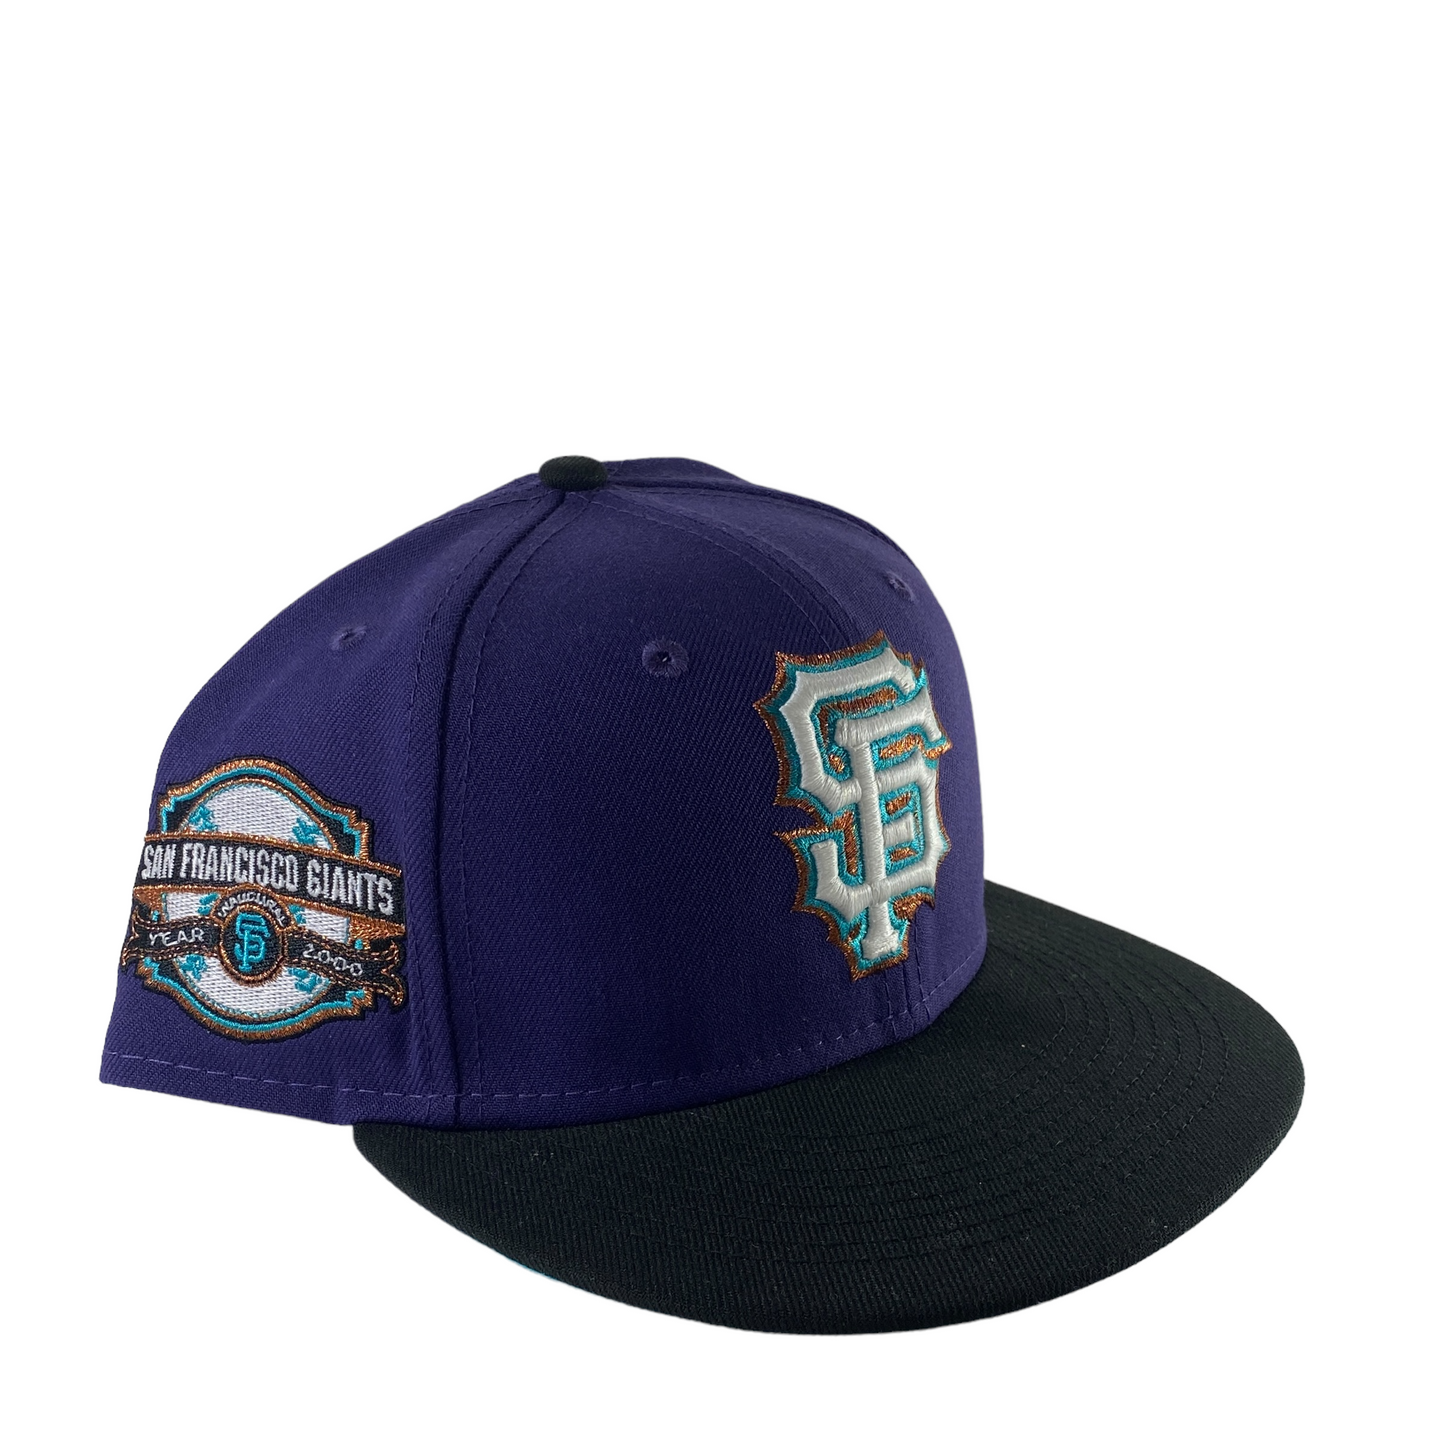 New Era SF Giants Inaugural Year 2000 Fitted Size 7 3/8